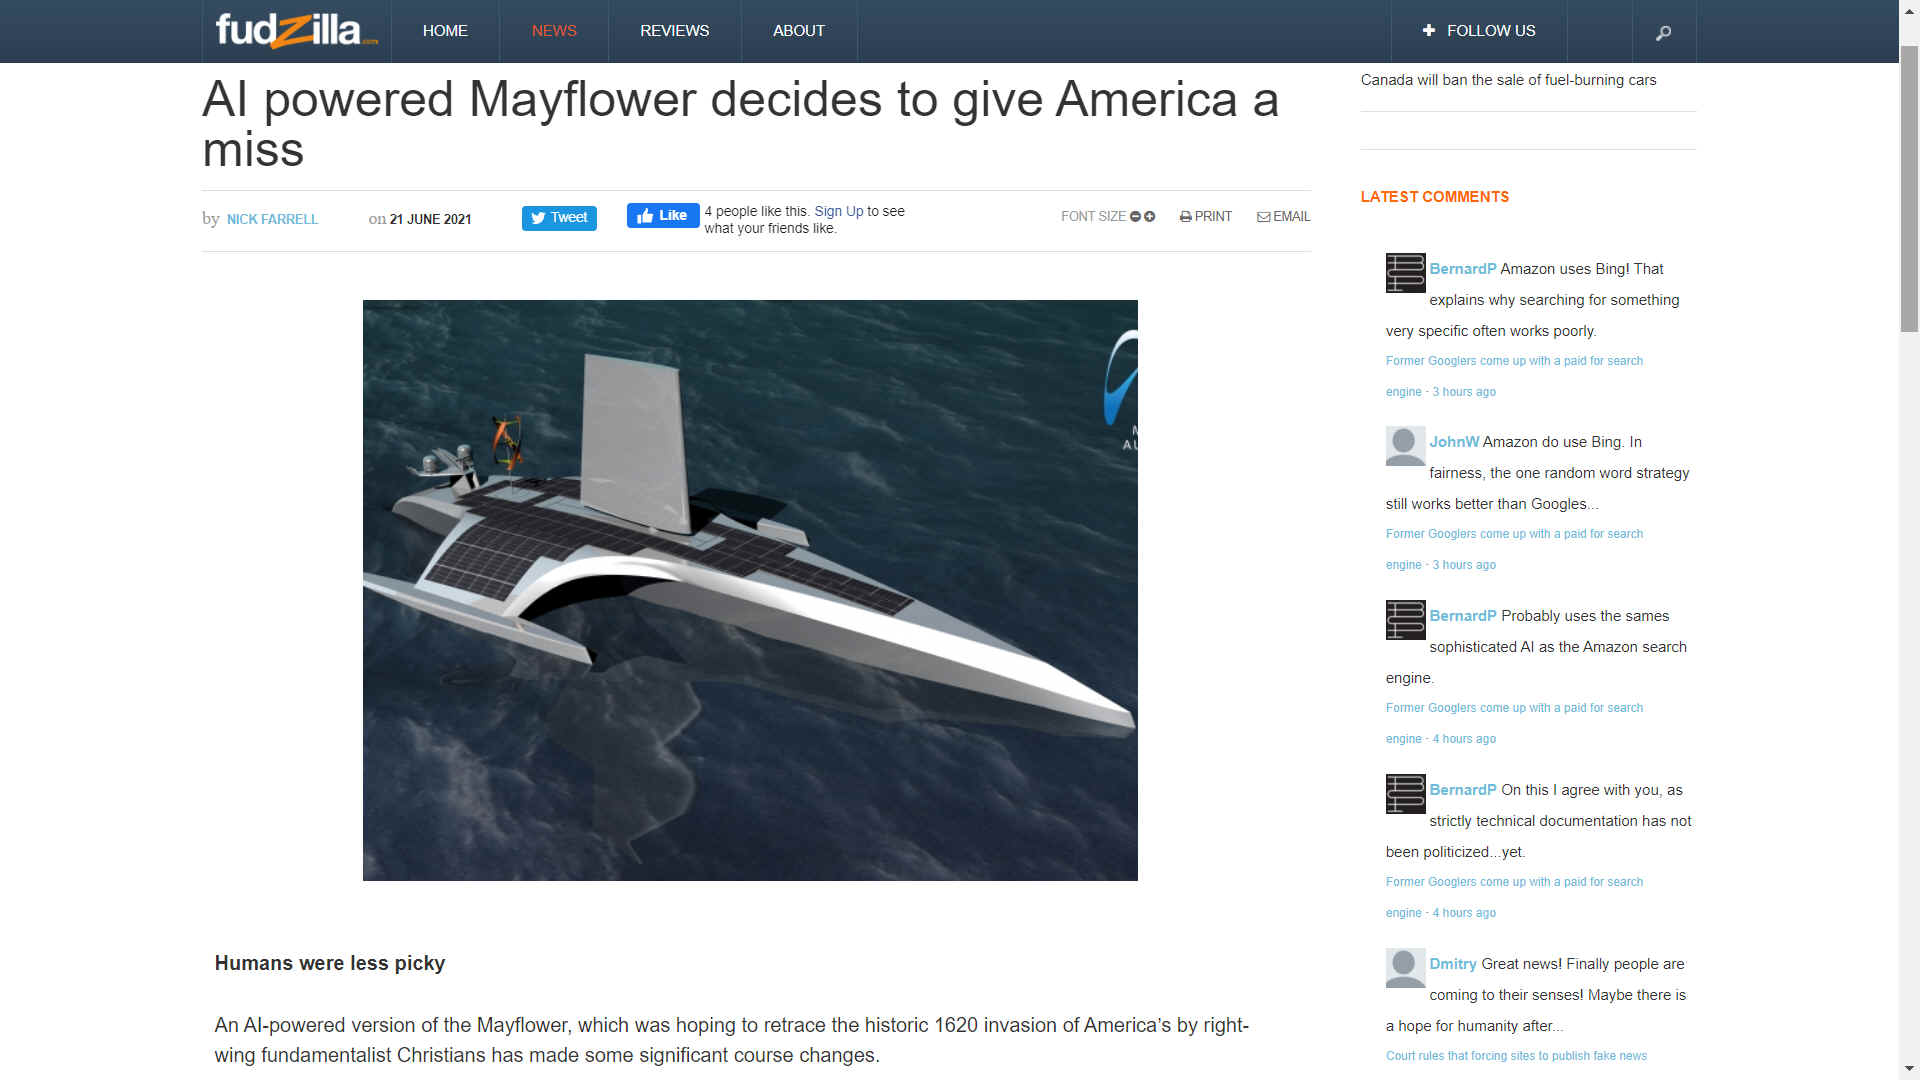 AI powered Mayfower ship decides to give America a miss